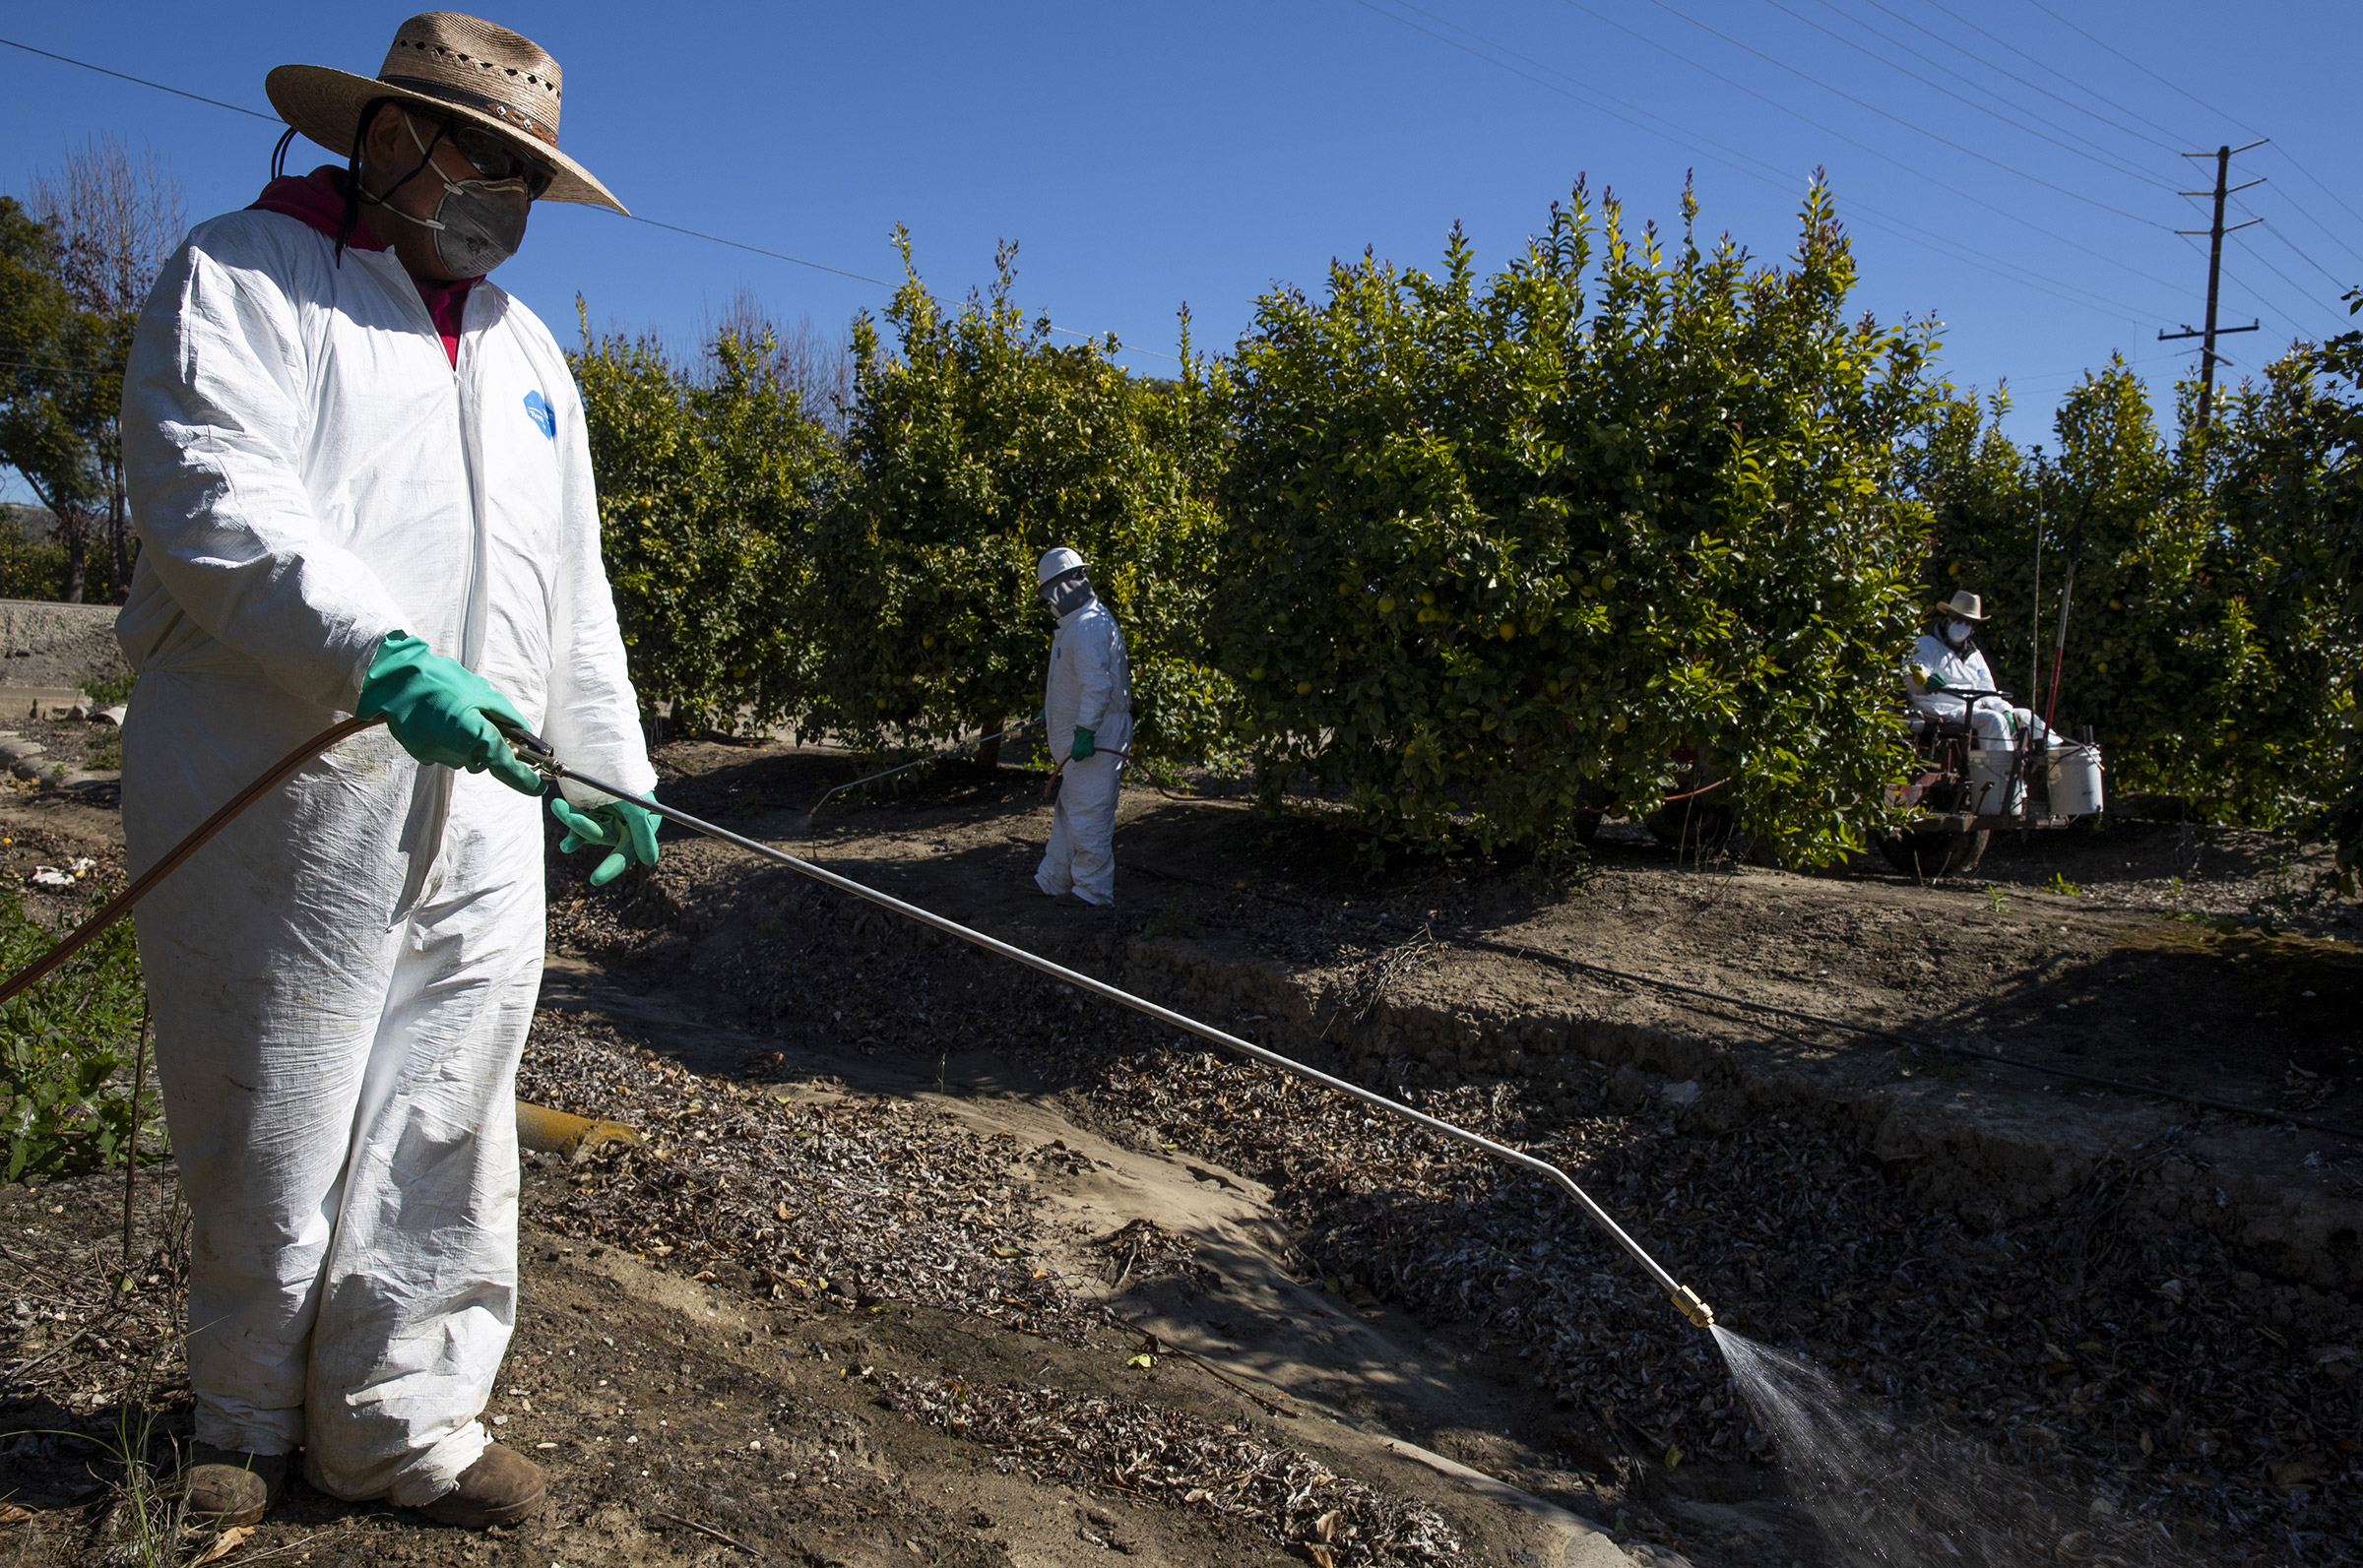 Agricultural laborers spray against insects and weeds inside the orchards of a fruit farm in Mesa, California. (Brent Stirton—Getty Images)